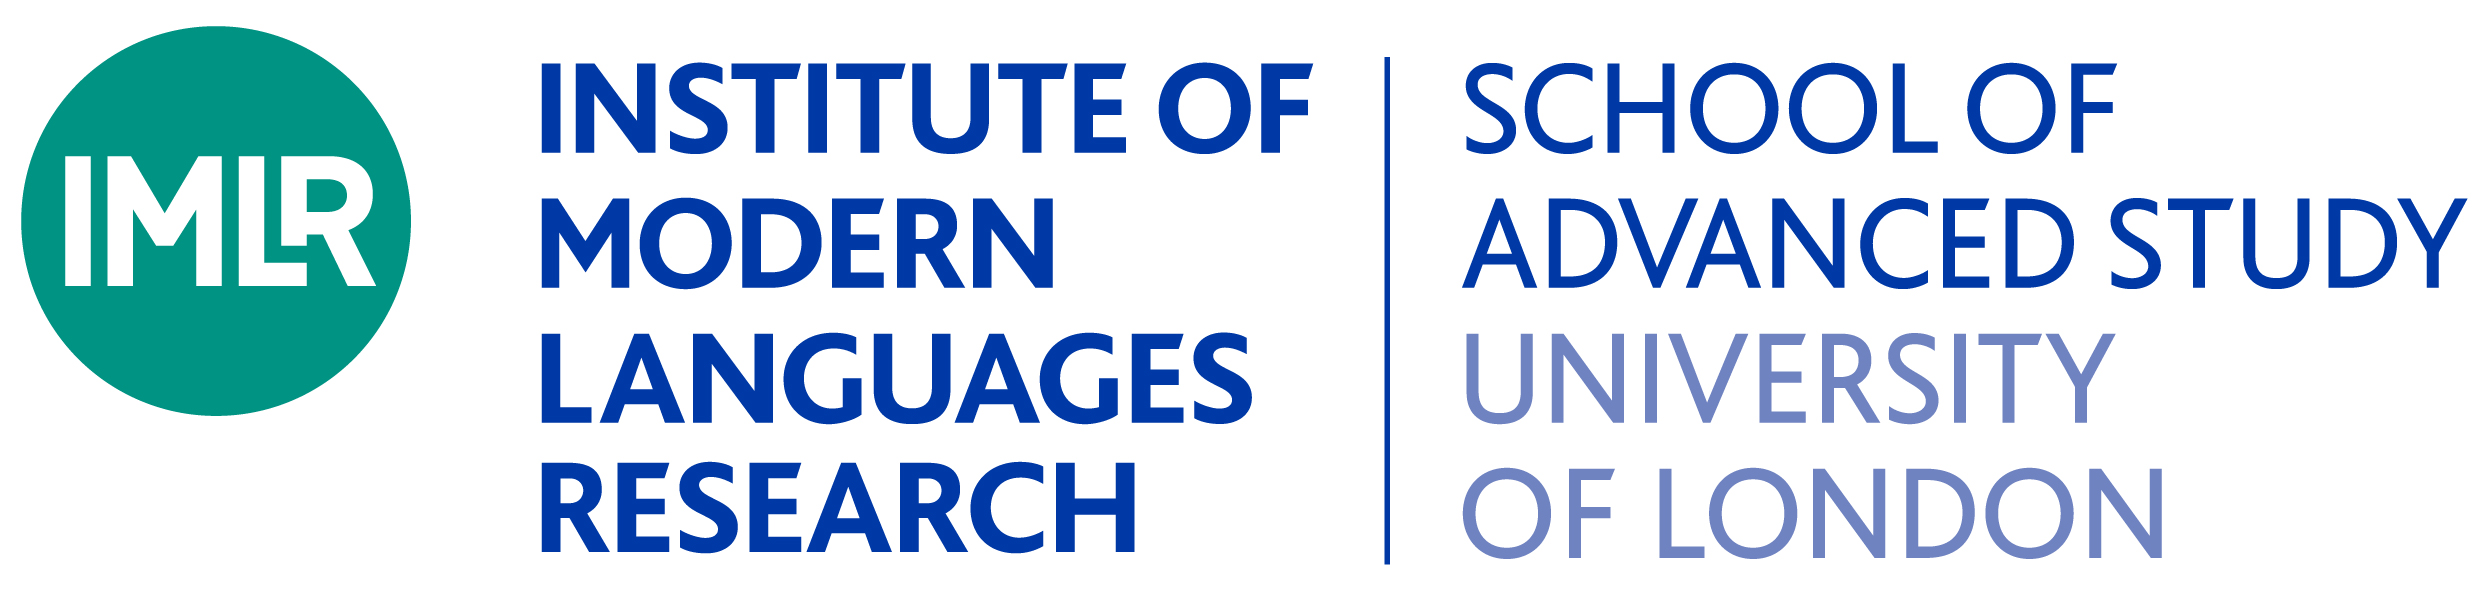 Institute of Modern Languages Research